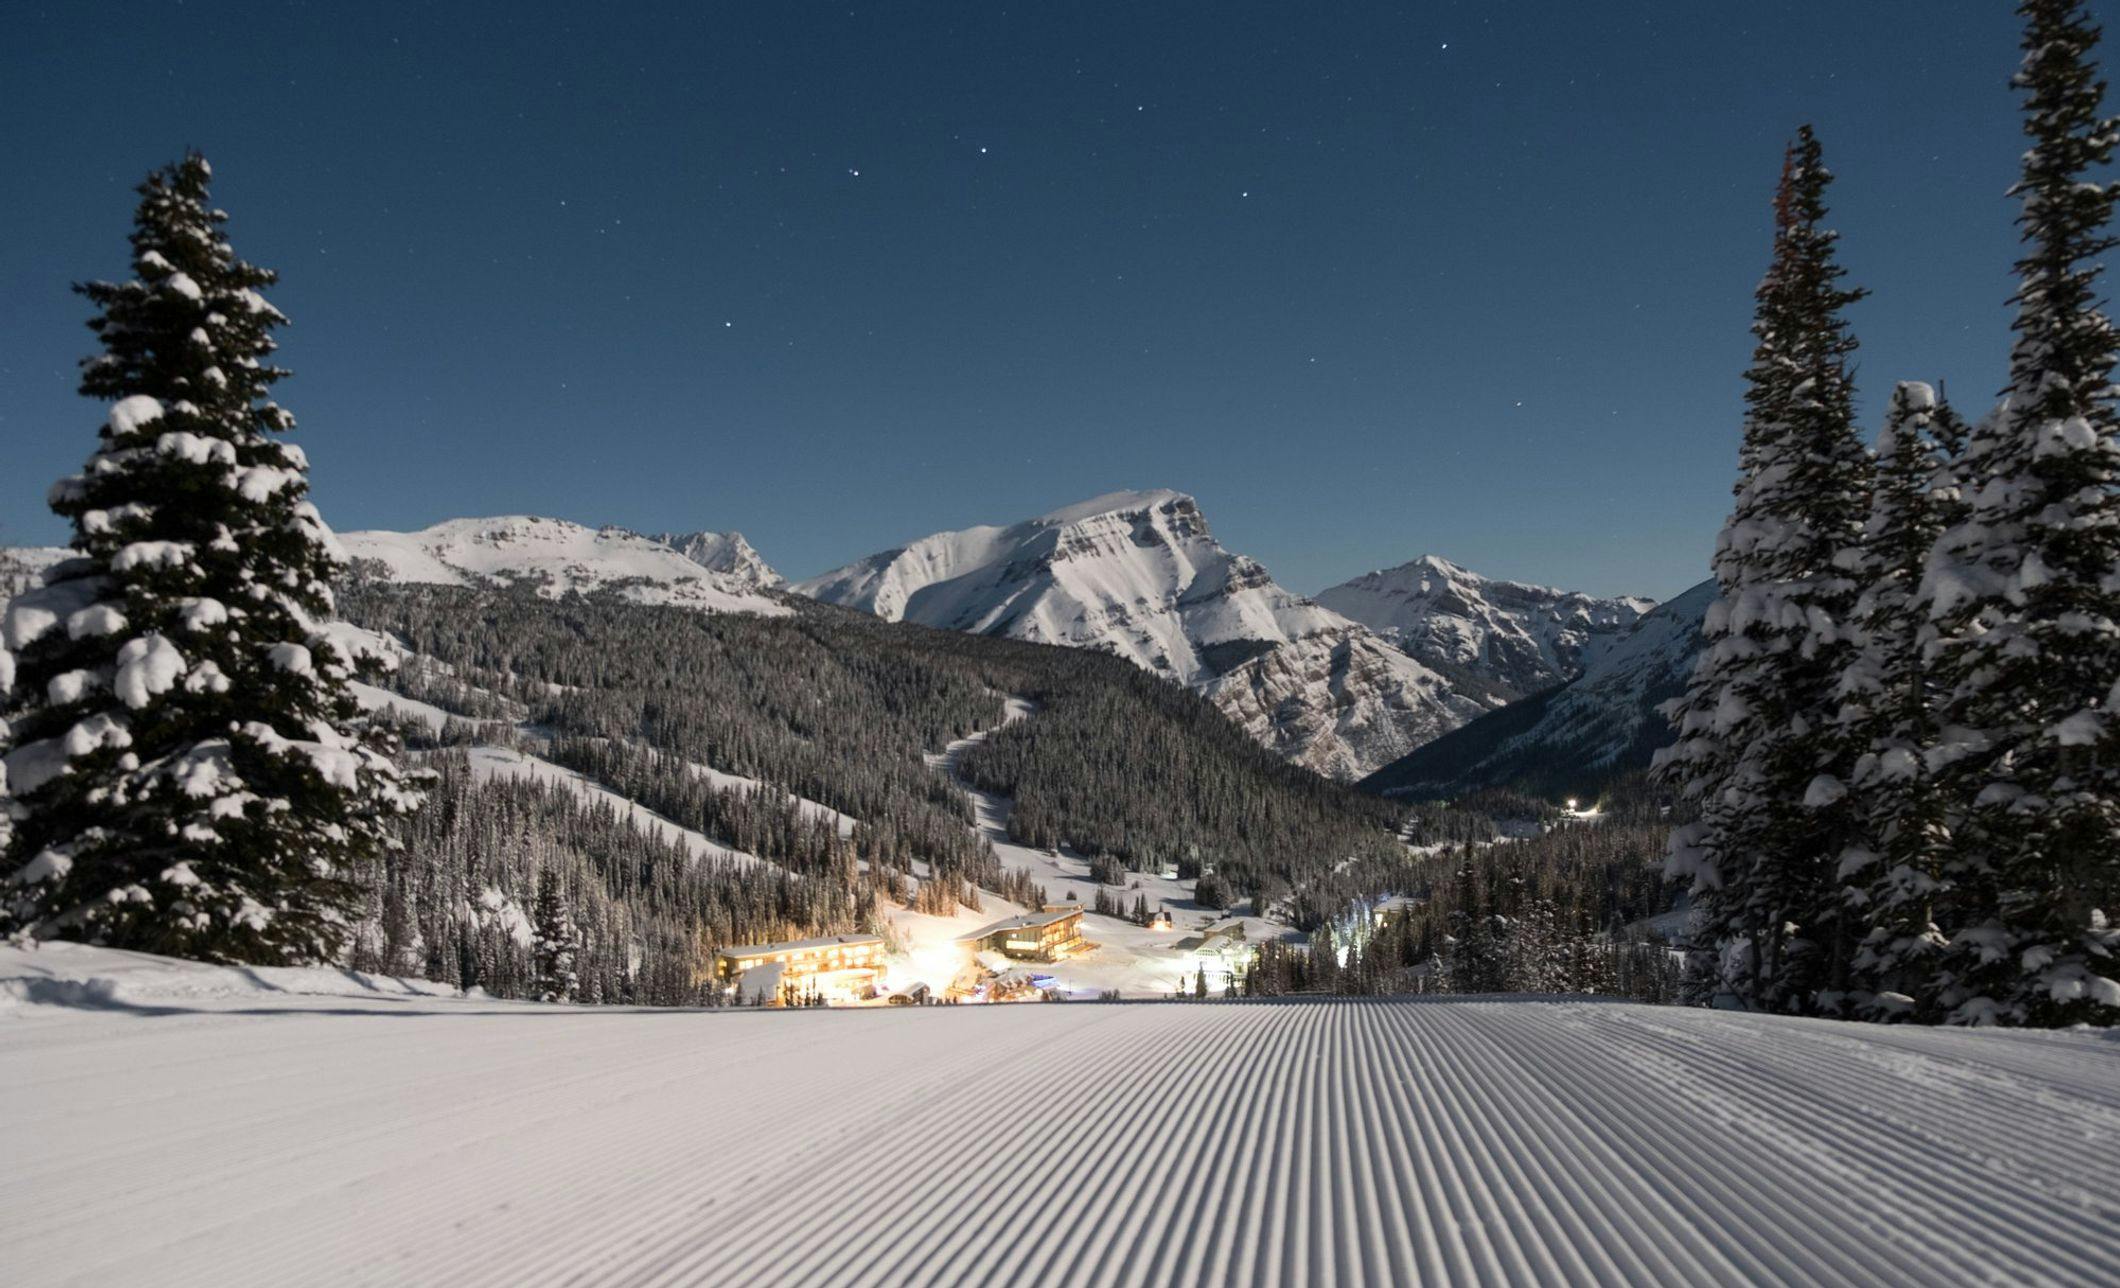 Sunshine Village Ski Resort lit up at night with snow on the ground and stars in the sky